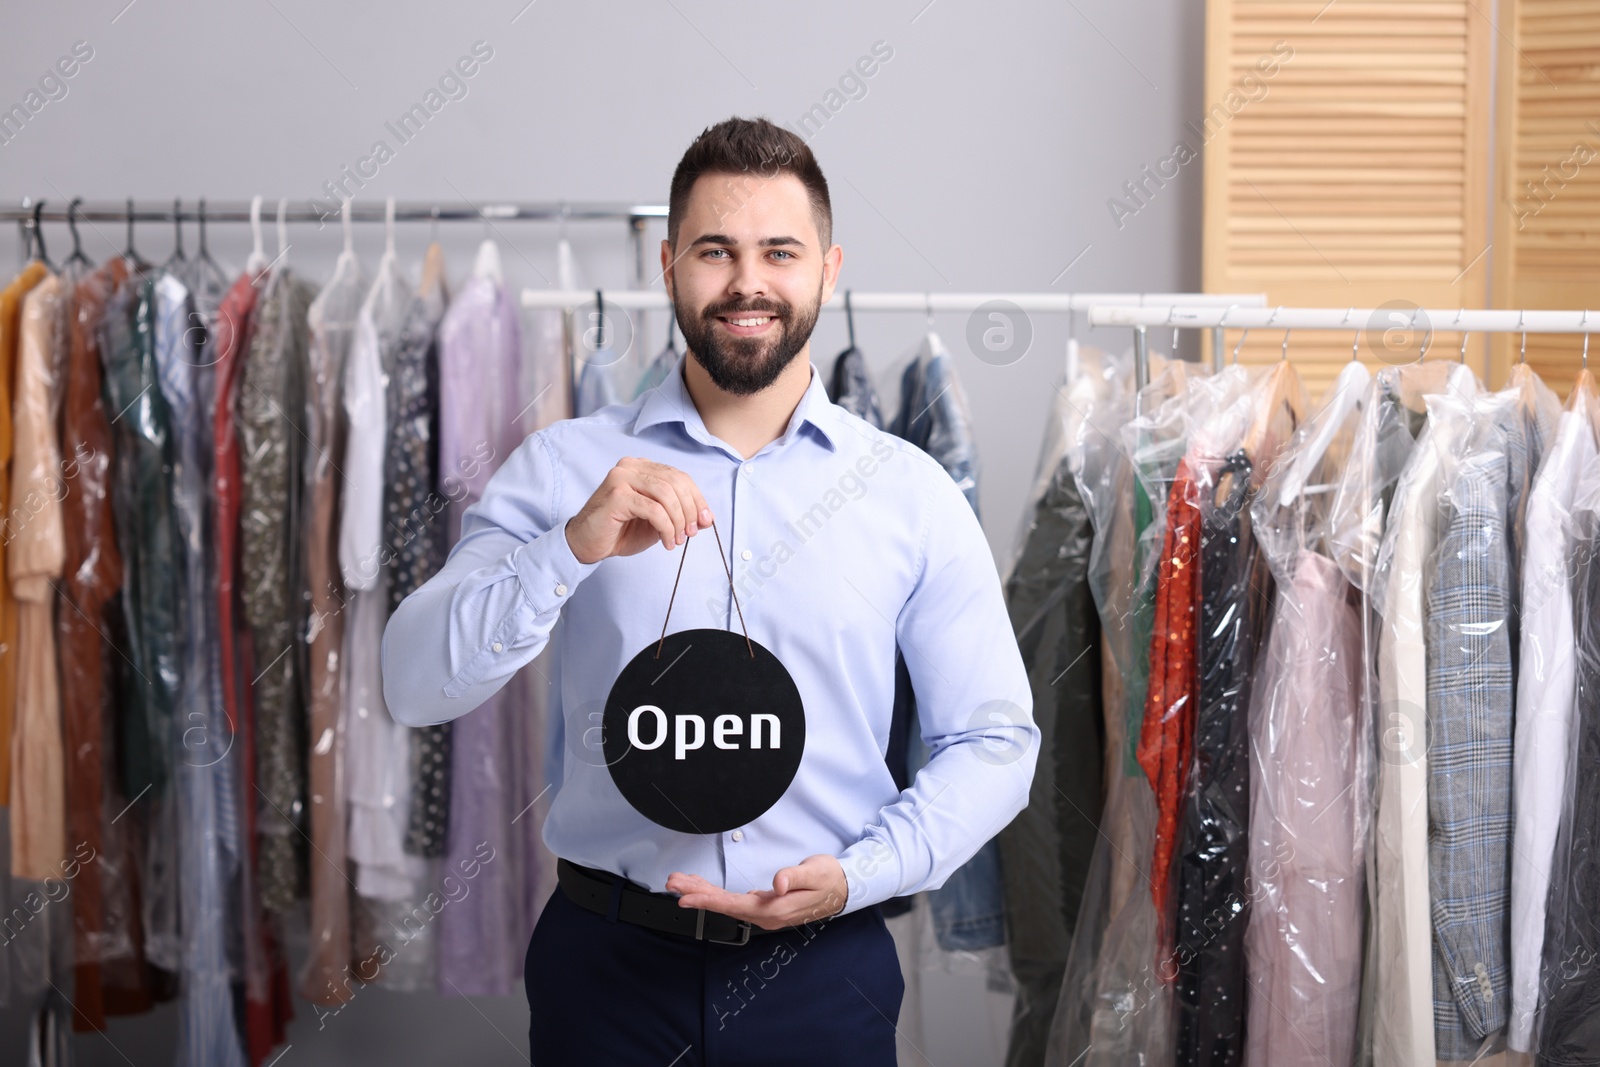 Photo of Dry-cleaning service. Happy worker holding Open sign near racks with clothes indoors